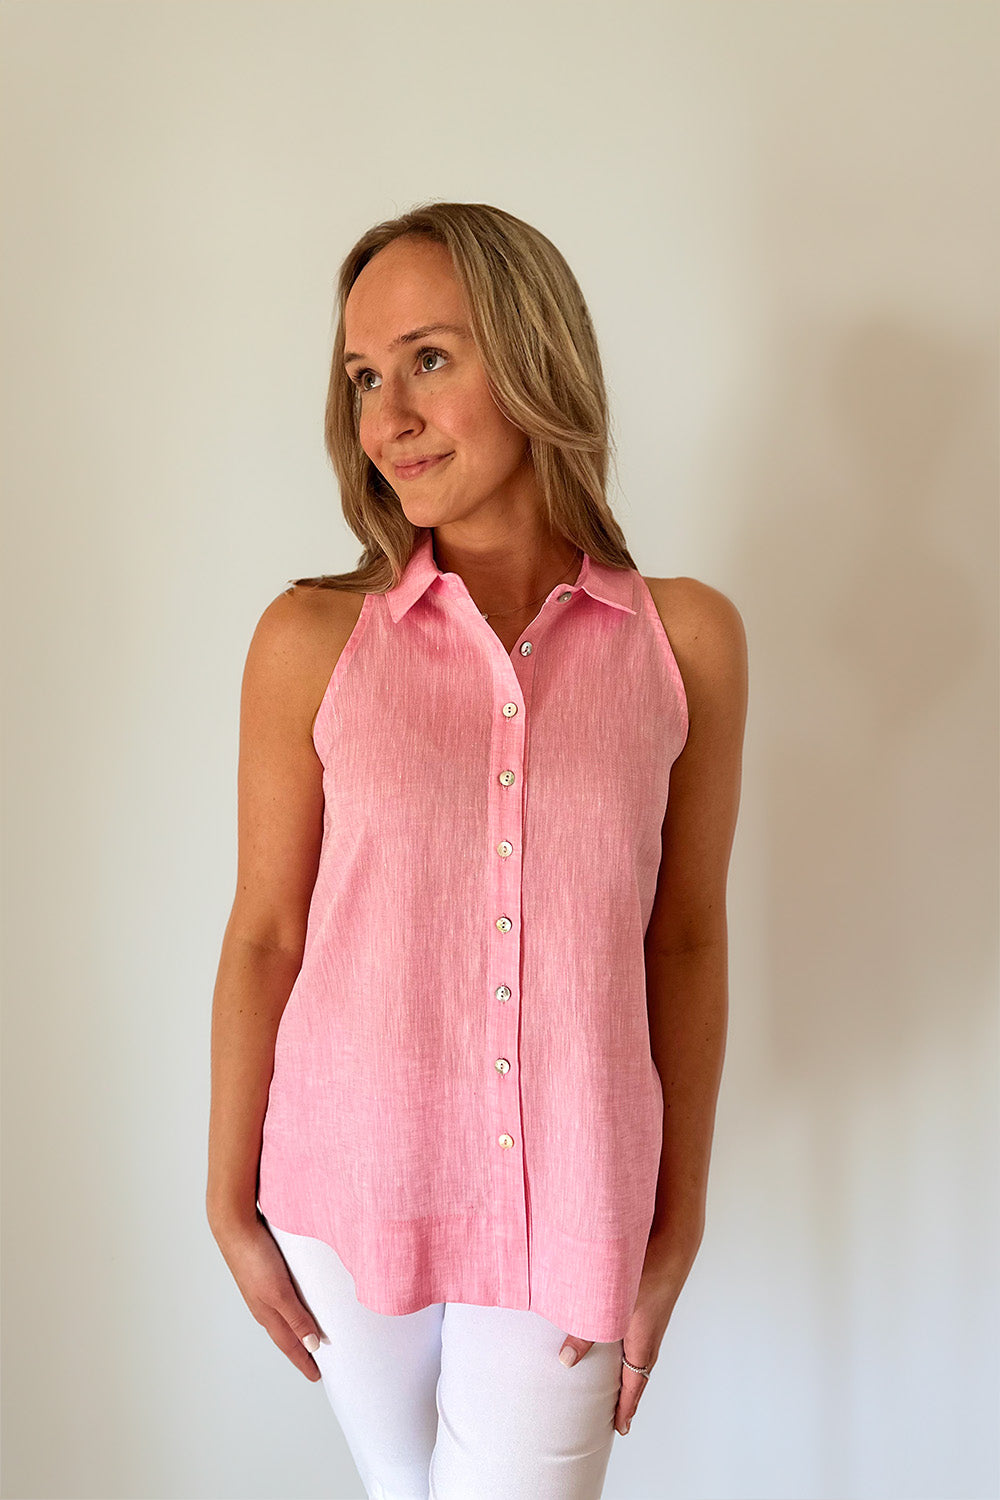 Woman in sleeveless button down top